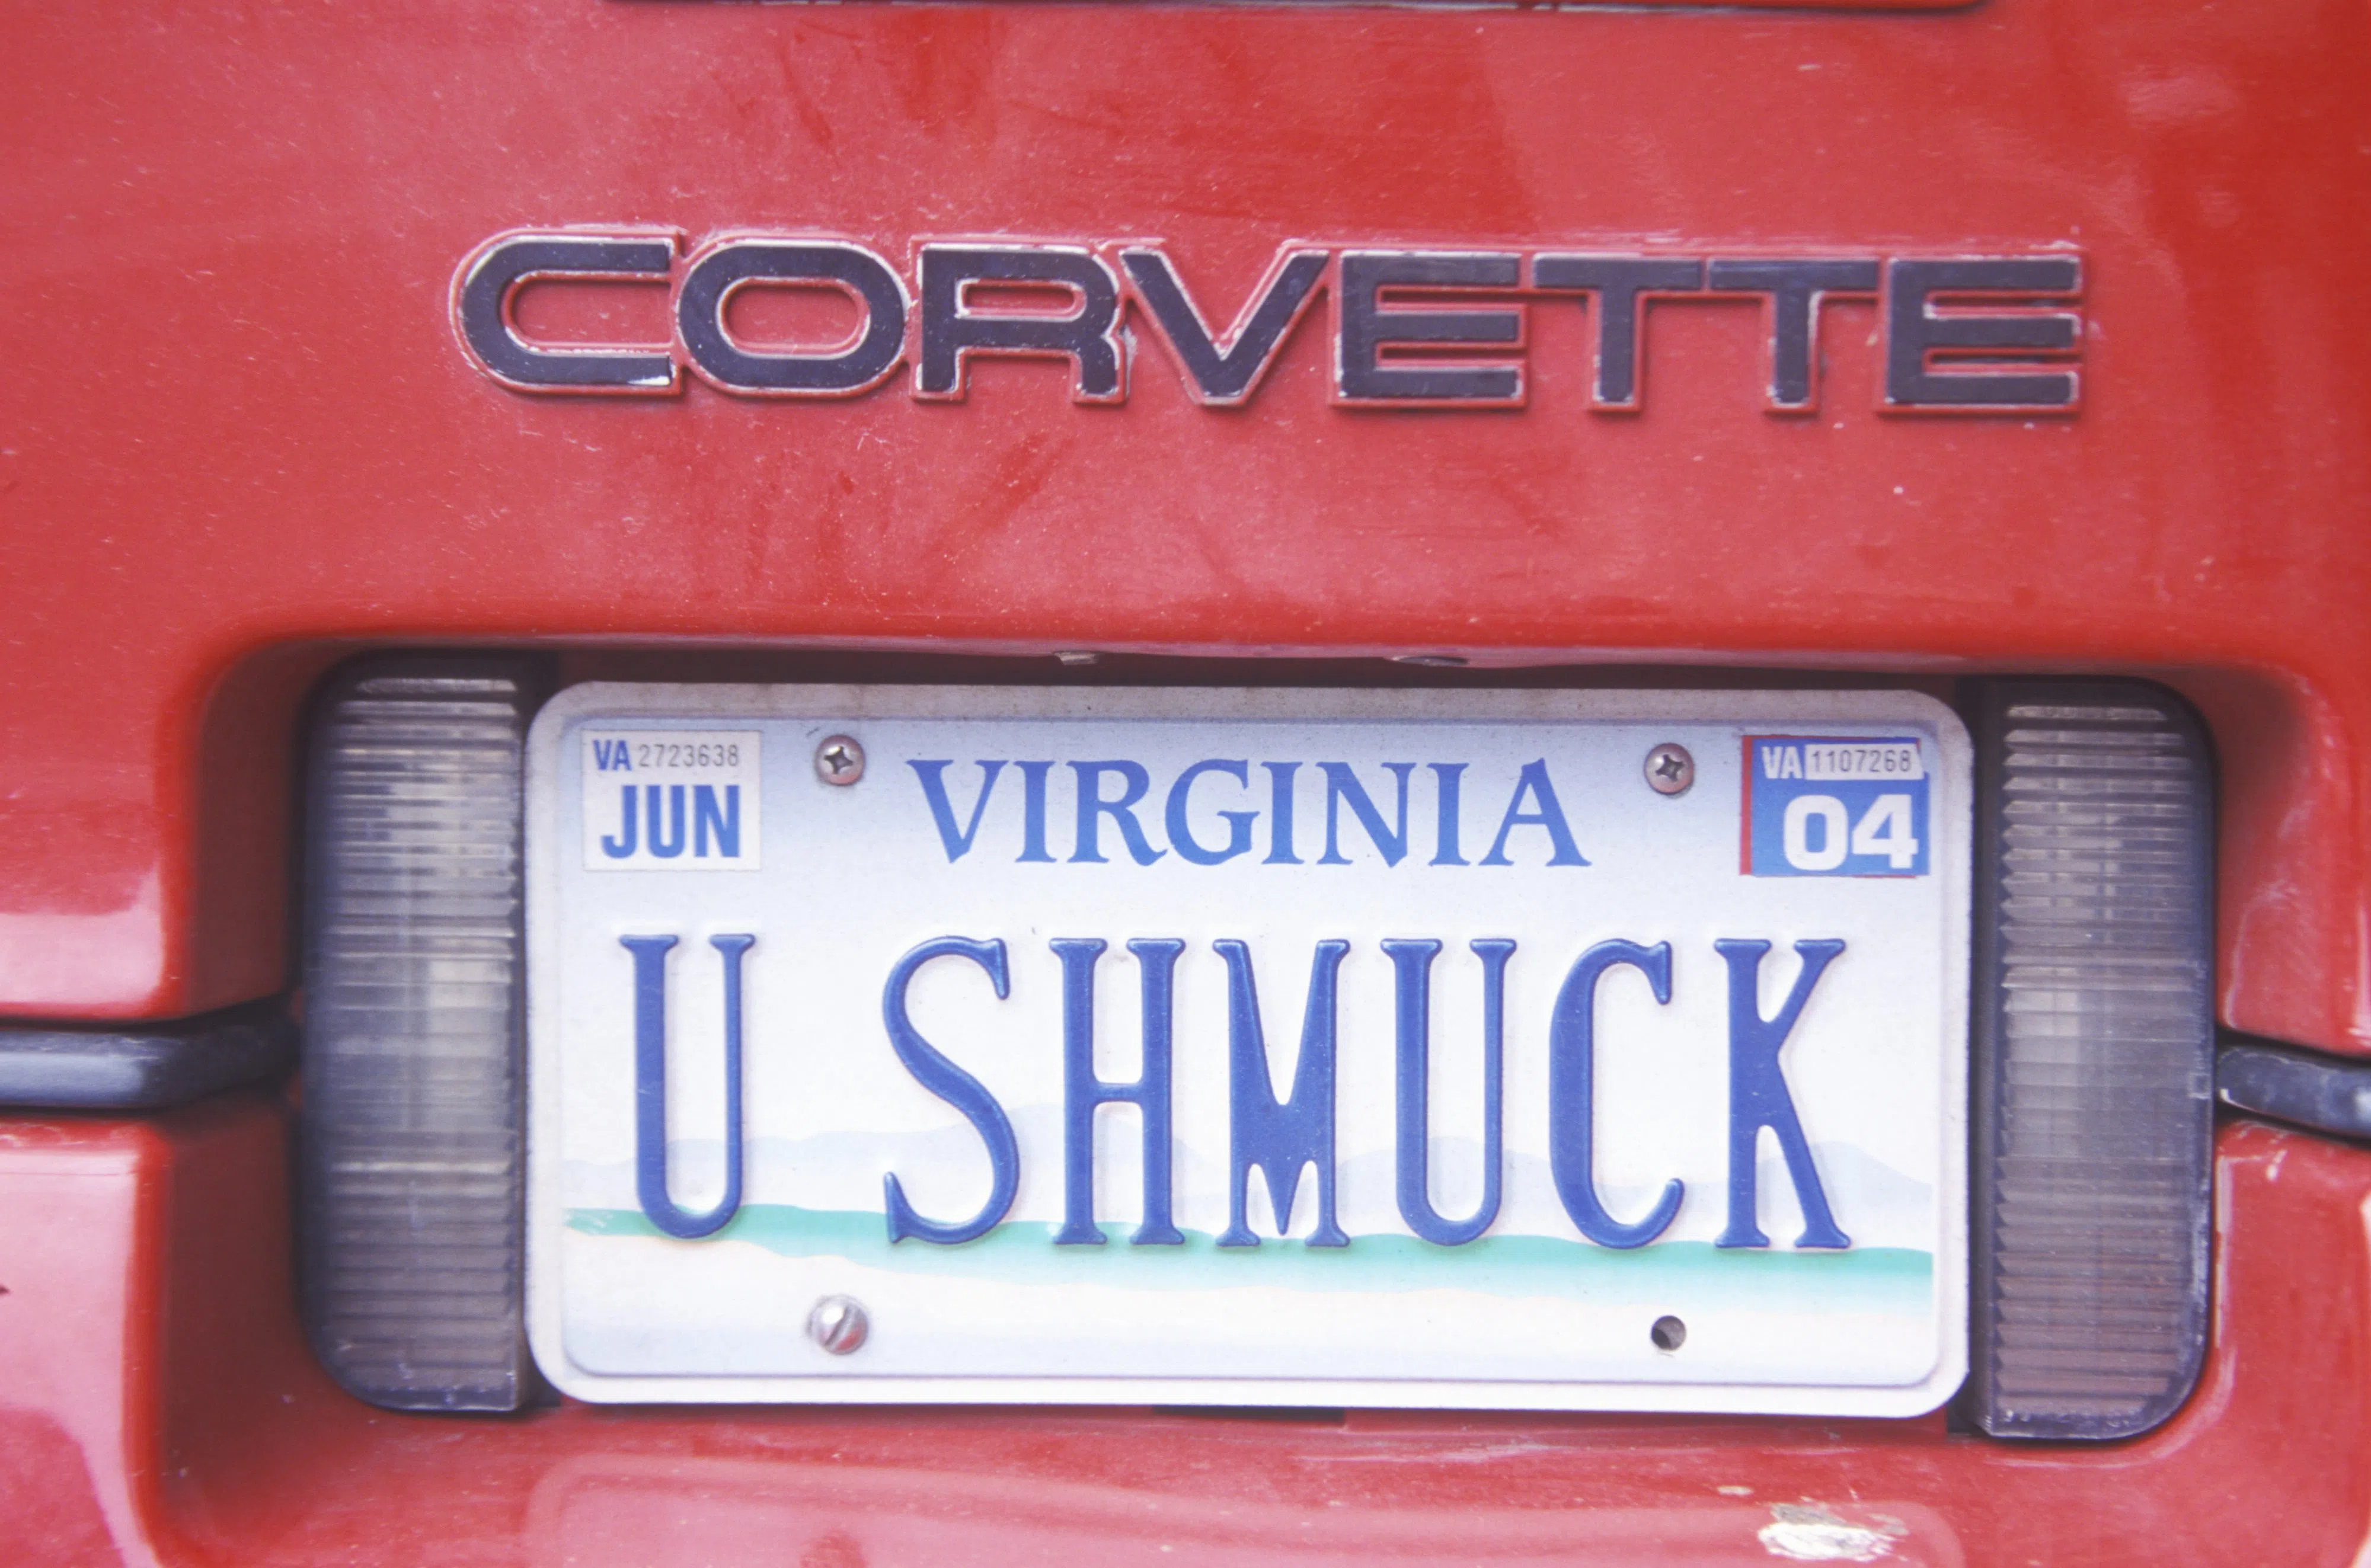 What Would You Choose For A Personalized Licence Plate?